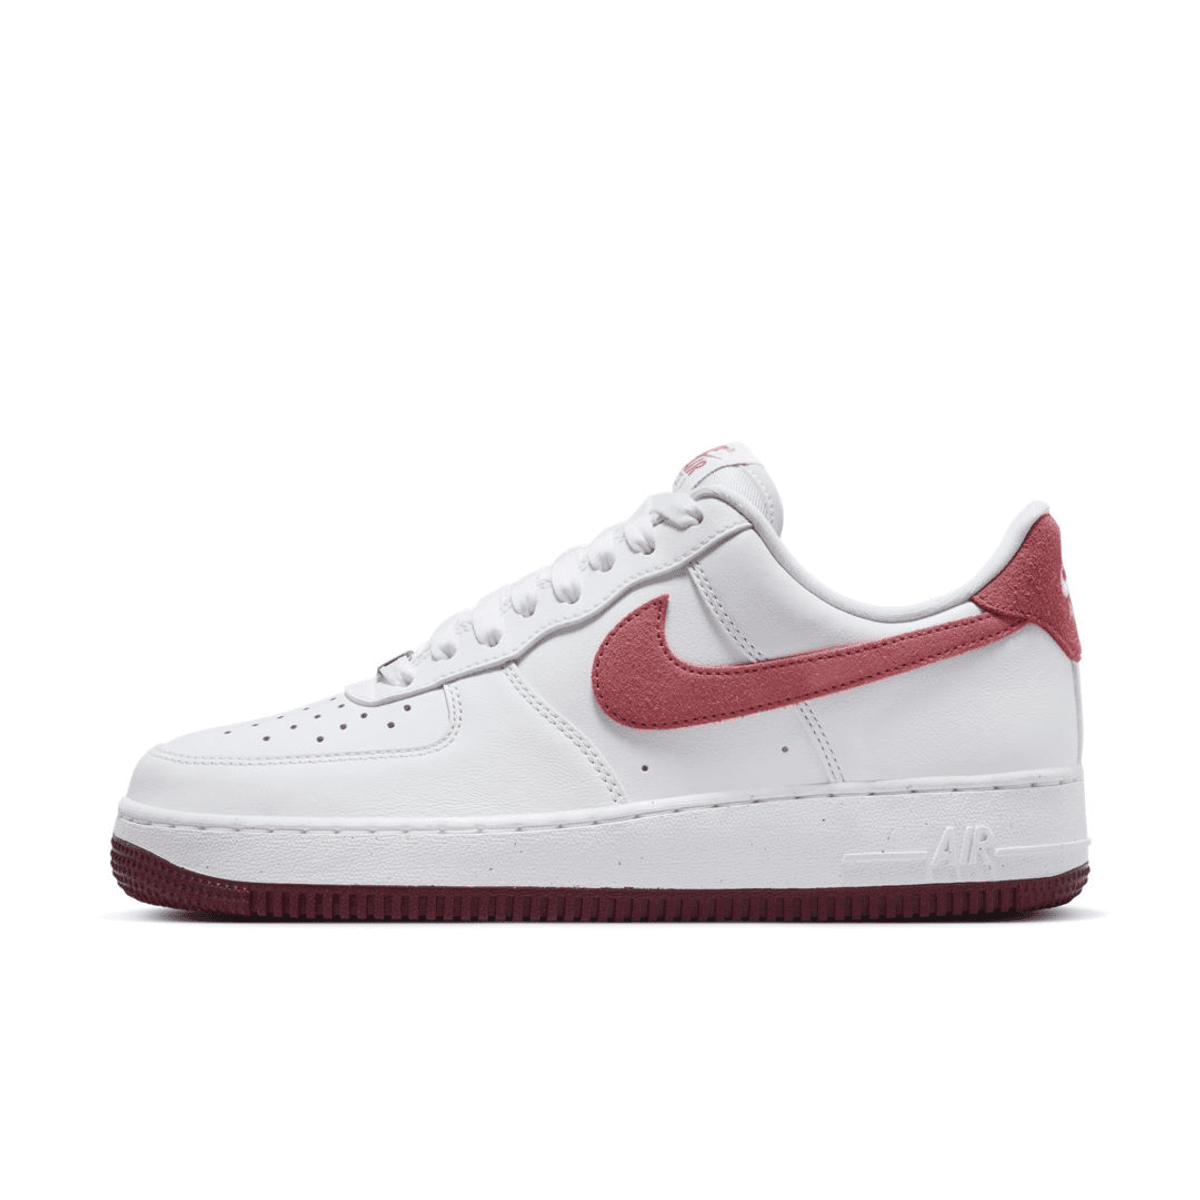 Official Images Of The Nike Air Force 1 Low "Adobe"